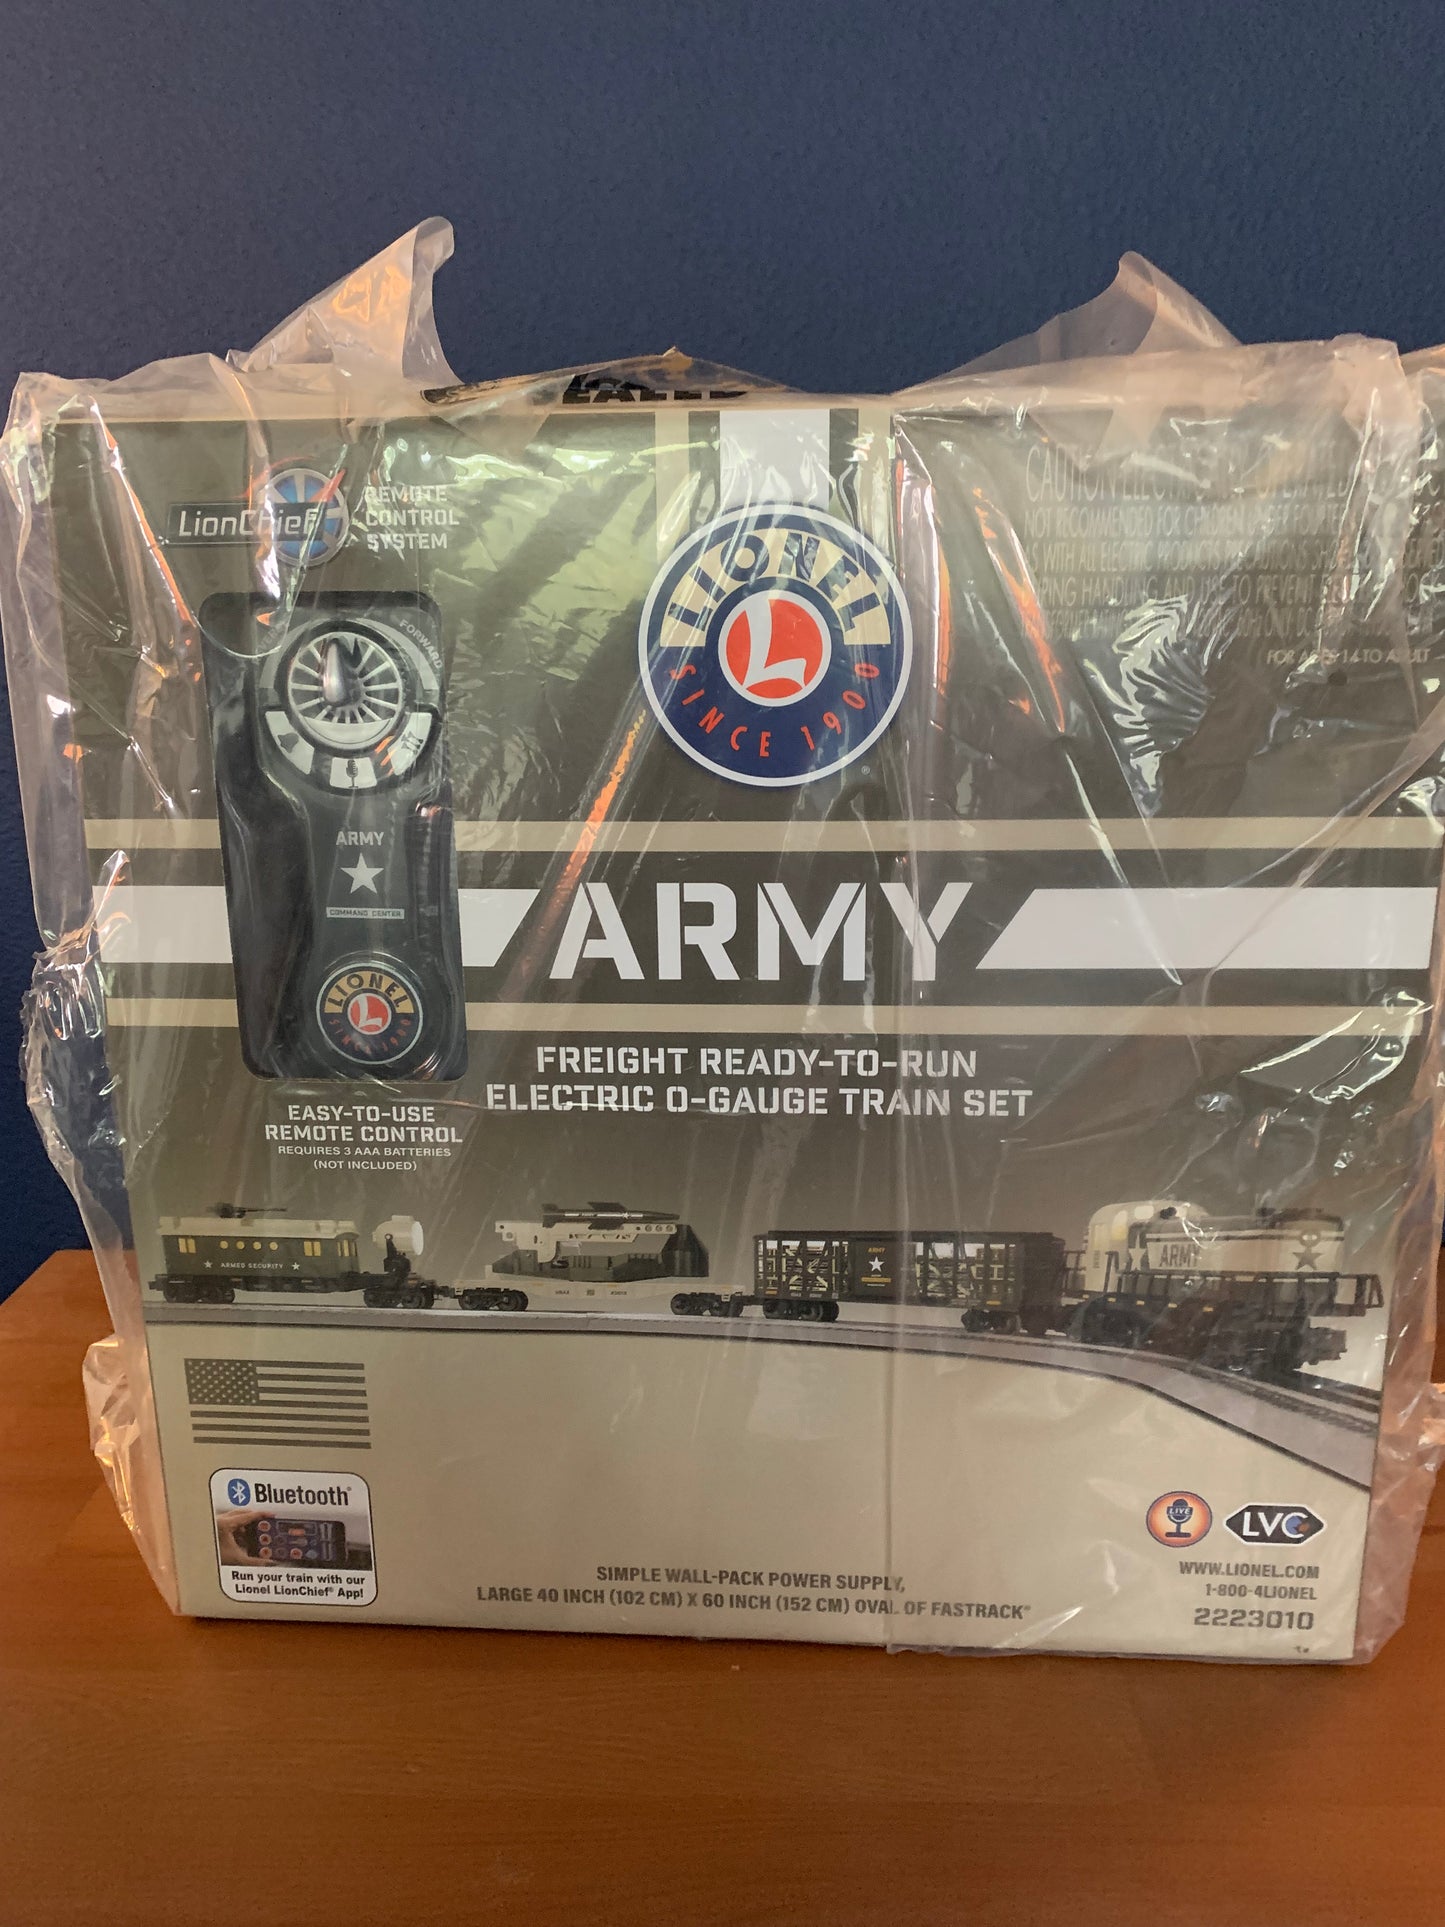 Packaging for Model Train set O scale Lionel Army Freight LionChief.